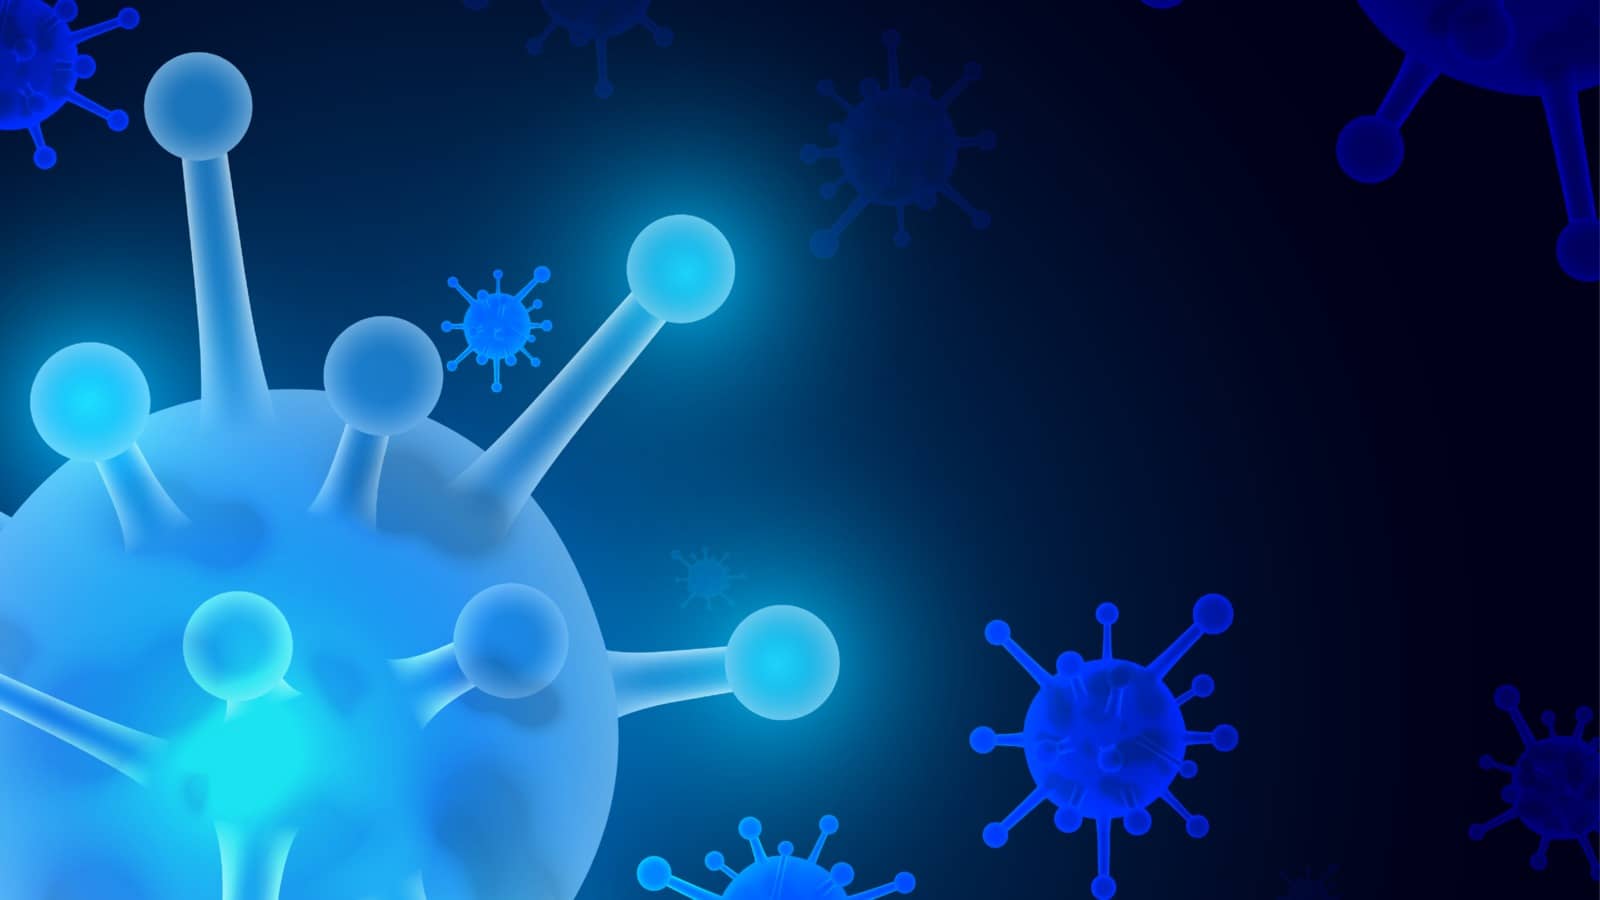 Virus COVID-19 background and Dangerous cells by Foryou13